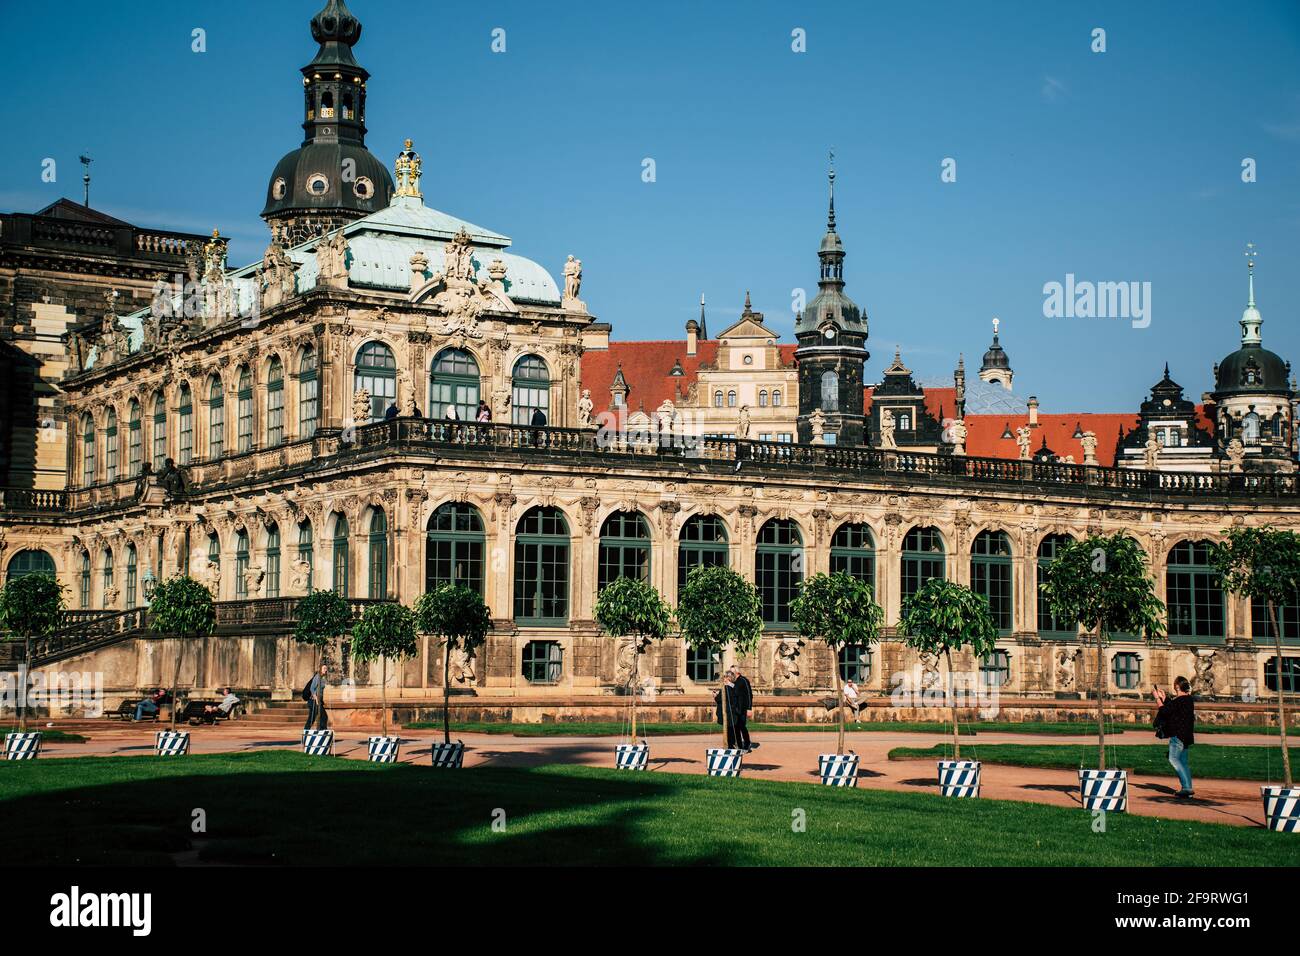 17 May 2019 Dresden, Germany - Bogengalerien (Bogen gallery) at Zwinger palace. Stock Photo